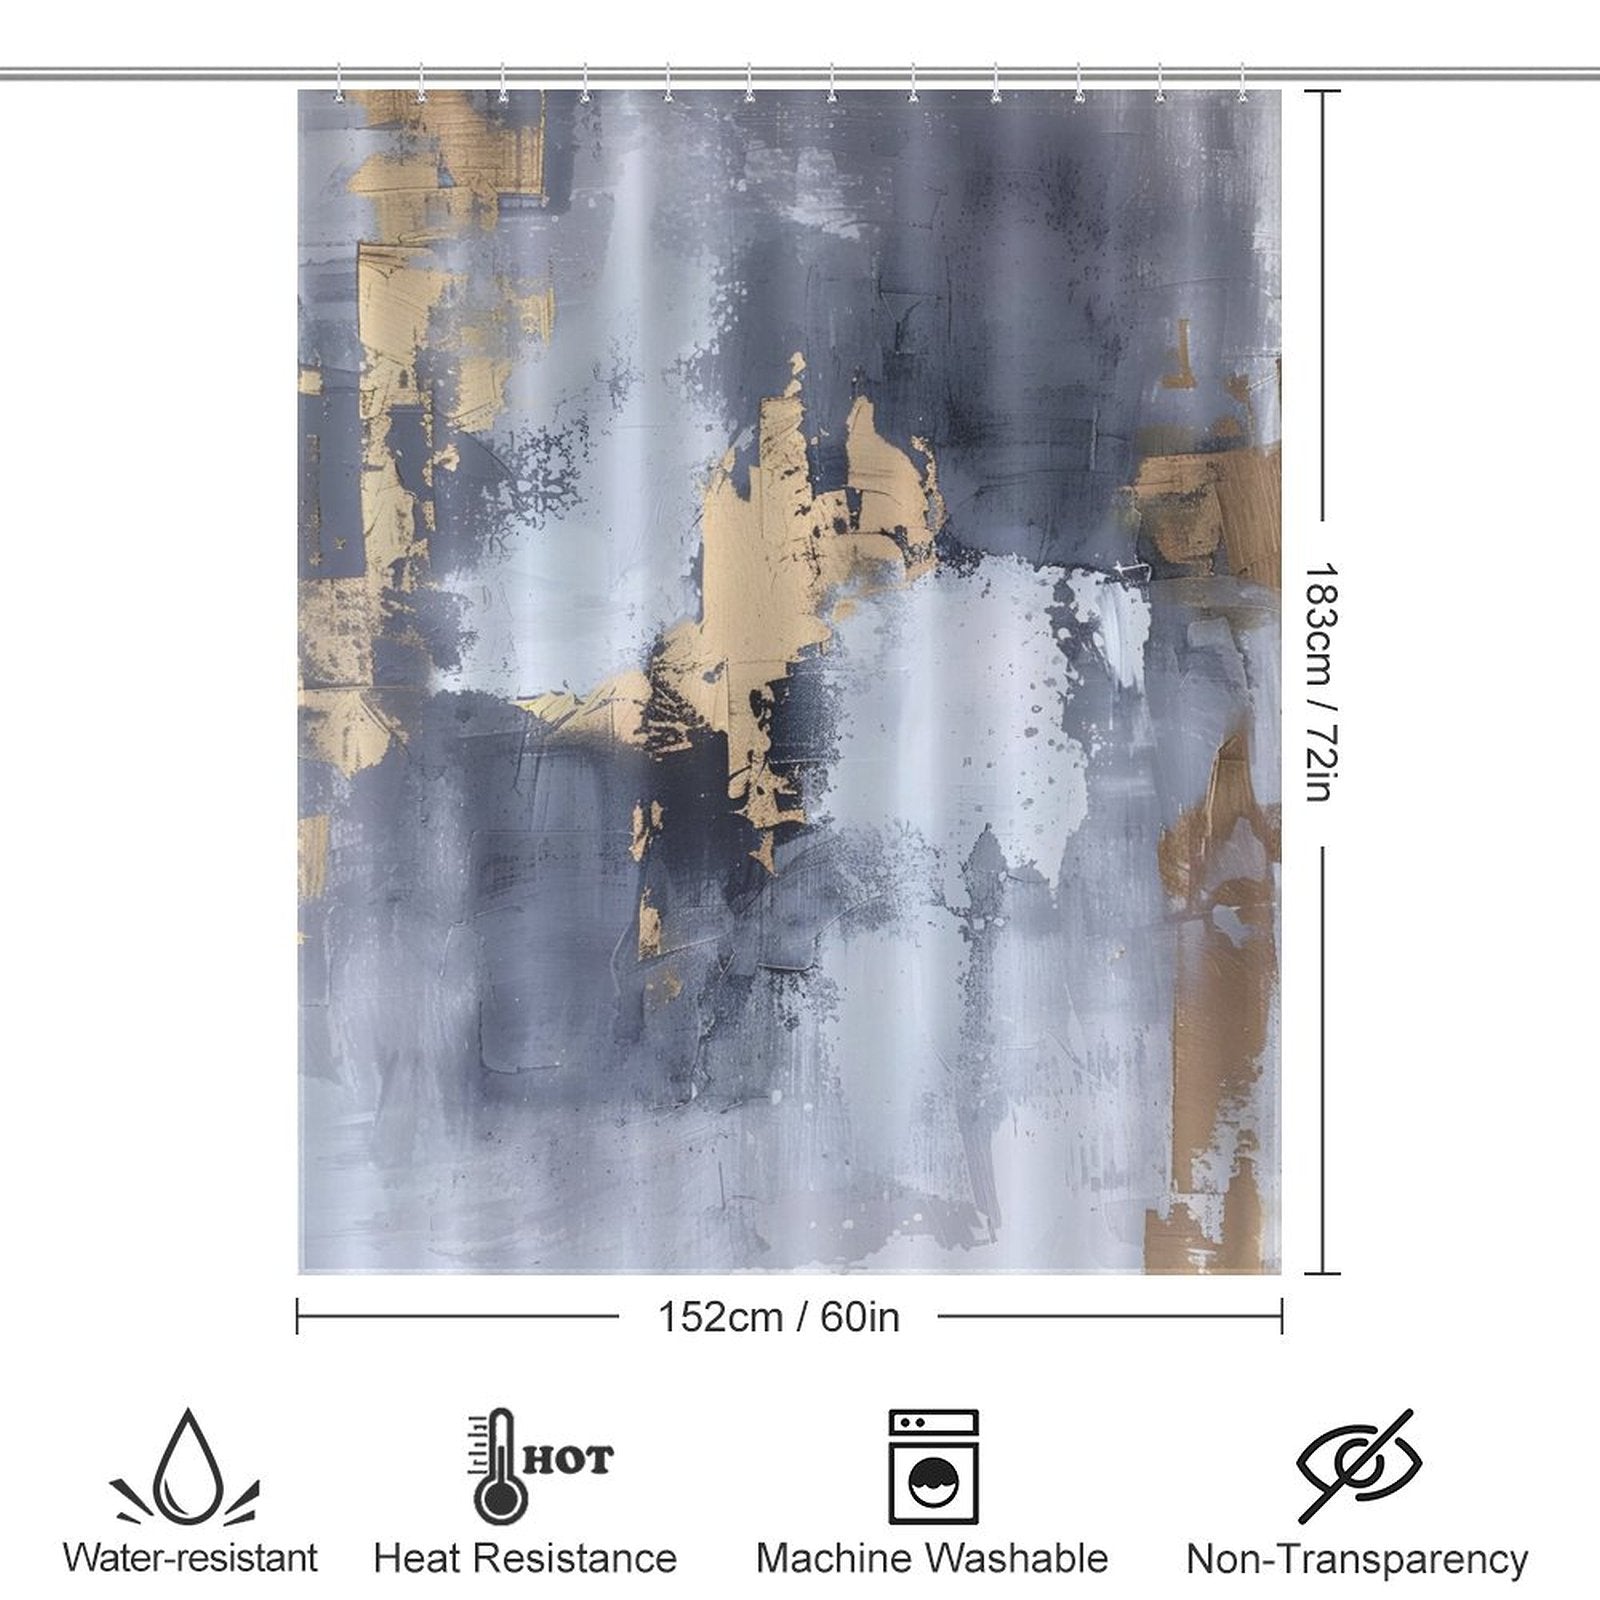 A Cotton Cat Grey and Gold Watercolor Abstract Modern Art White Silver Strokes Shower Curtain-Cottoncat featuring a grey and gold watercolor design. It measures 183 cm by 152 cm and is waterproof, mildew-resistant, heat-resistant, machine washable, and non-transparent.